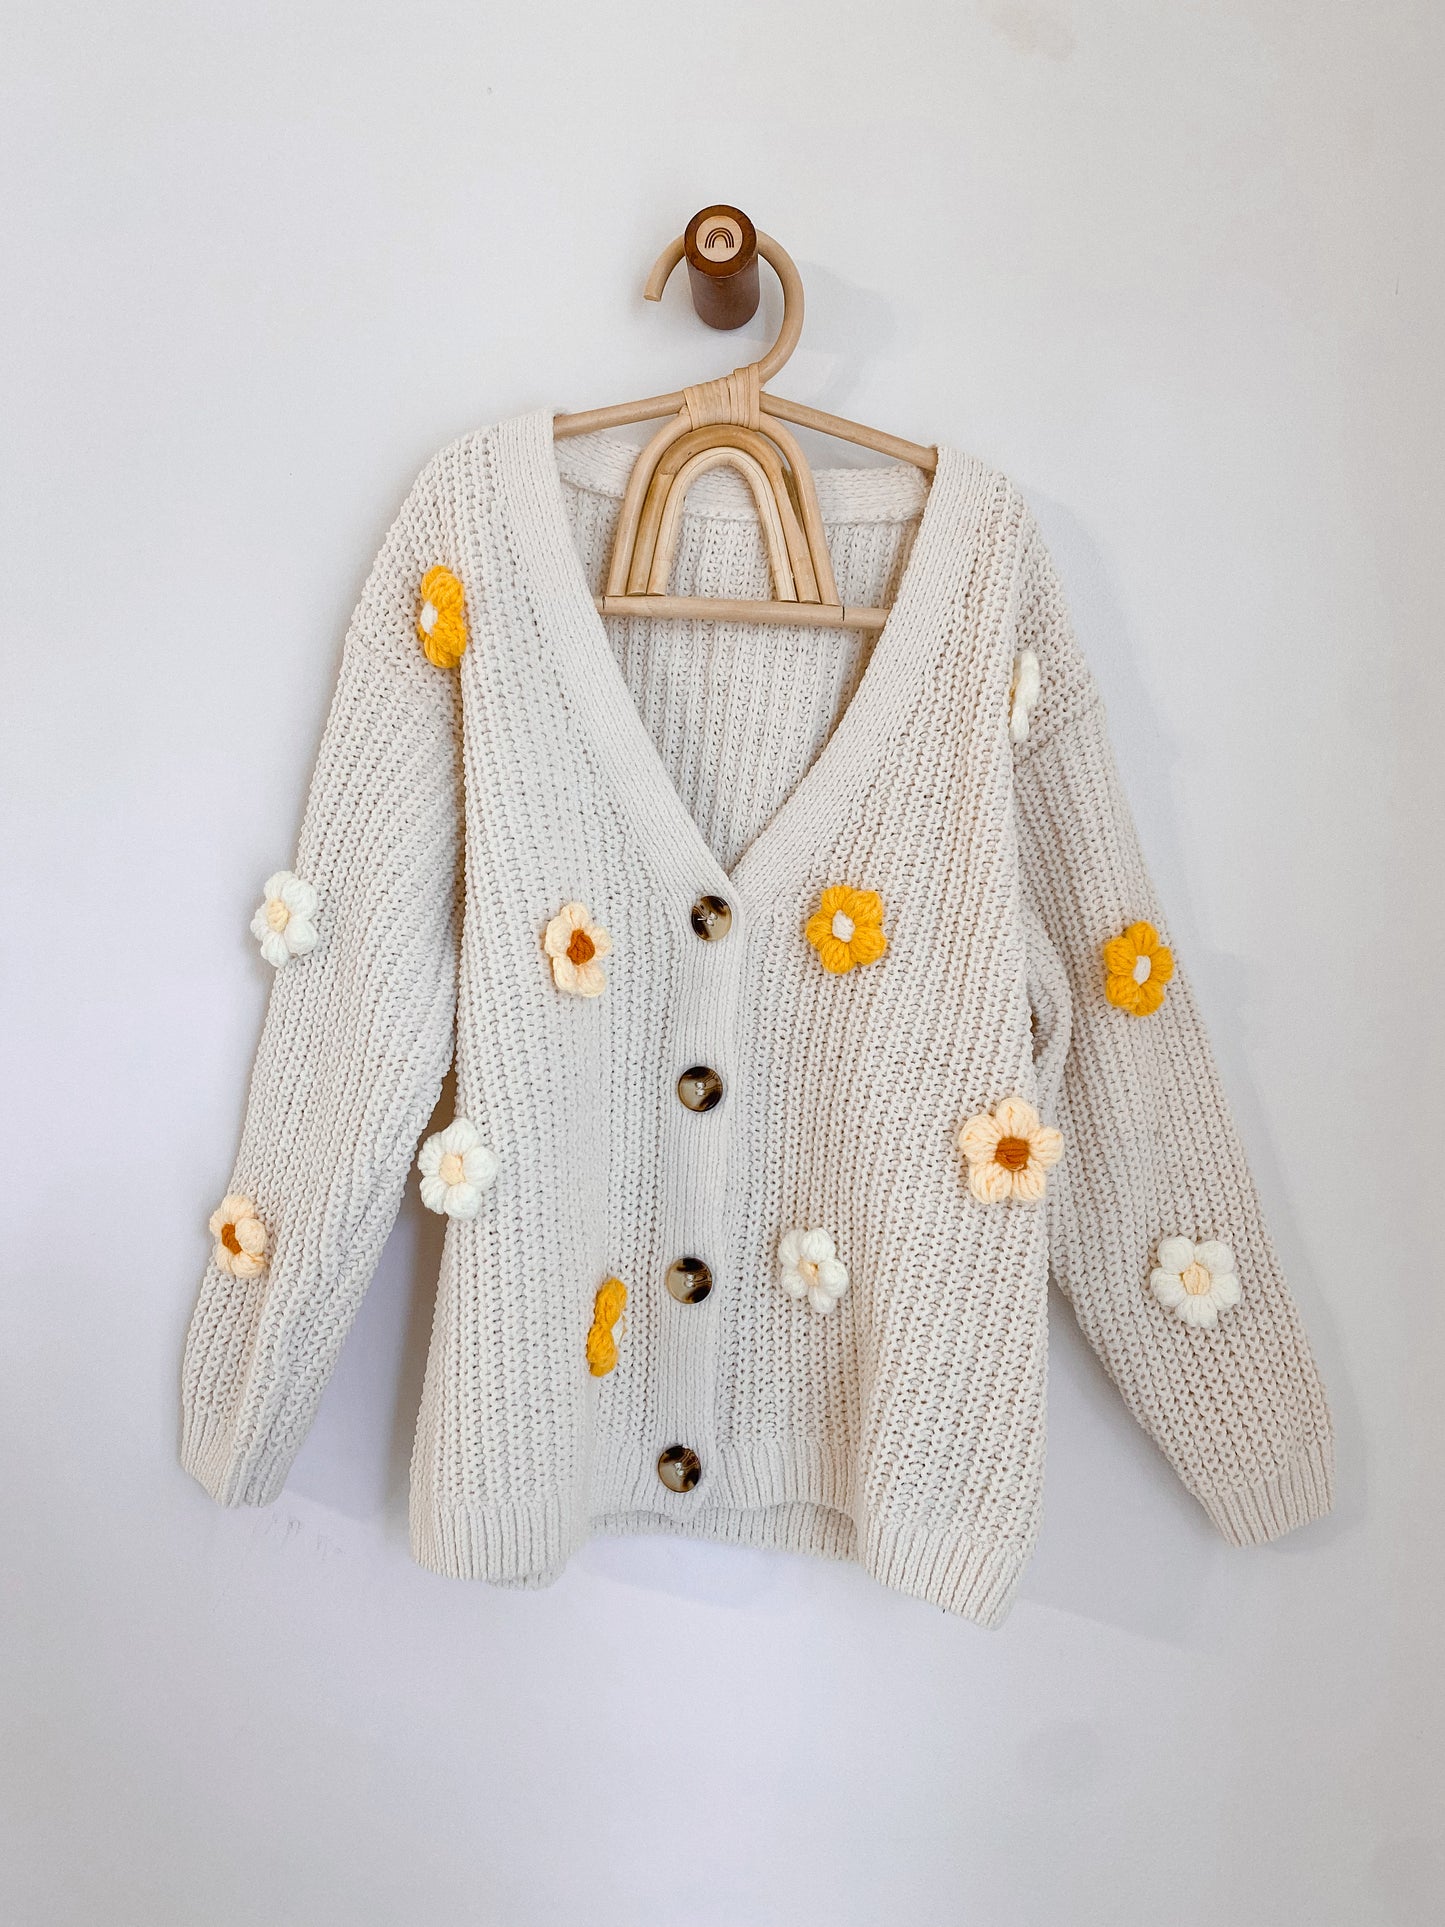 Cardigans with crocheted flowers